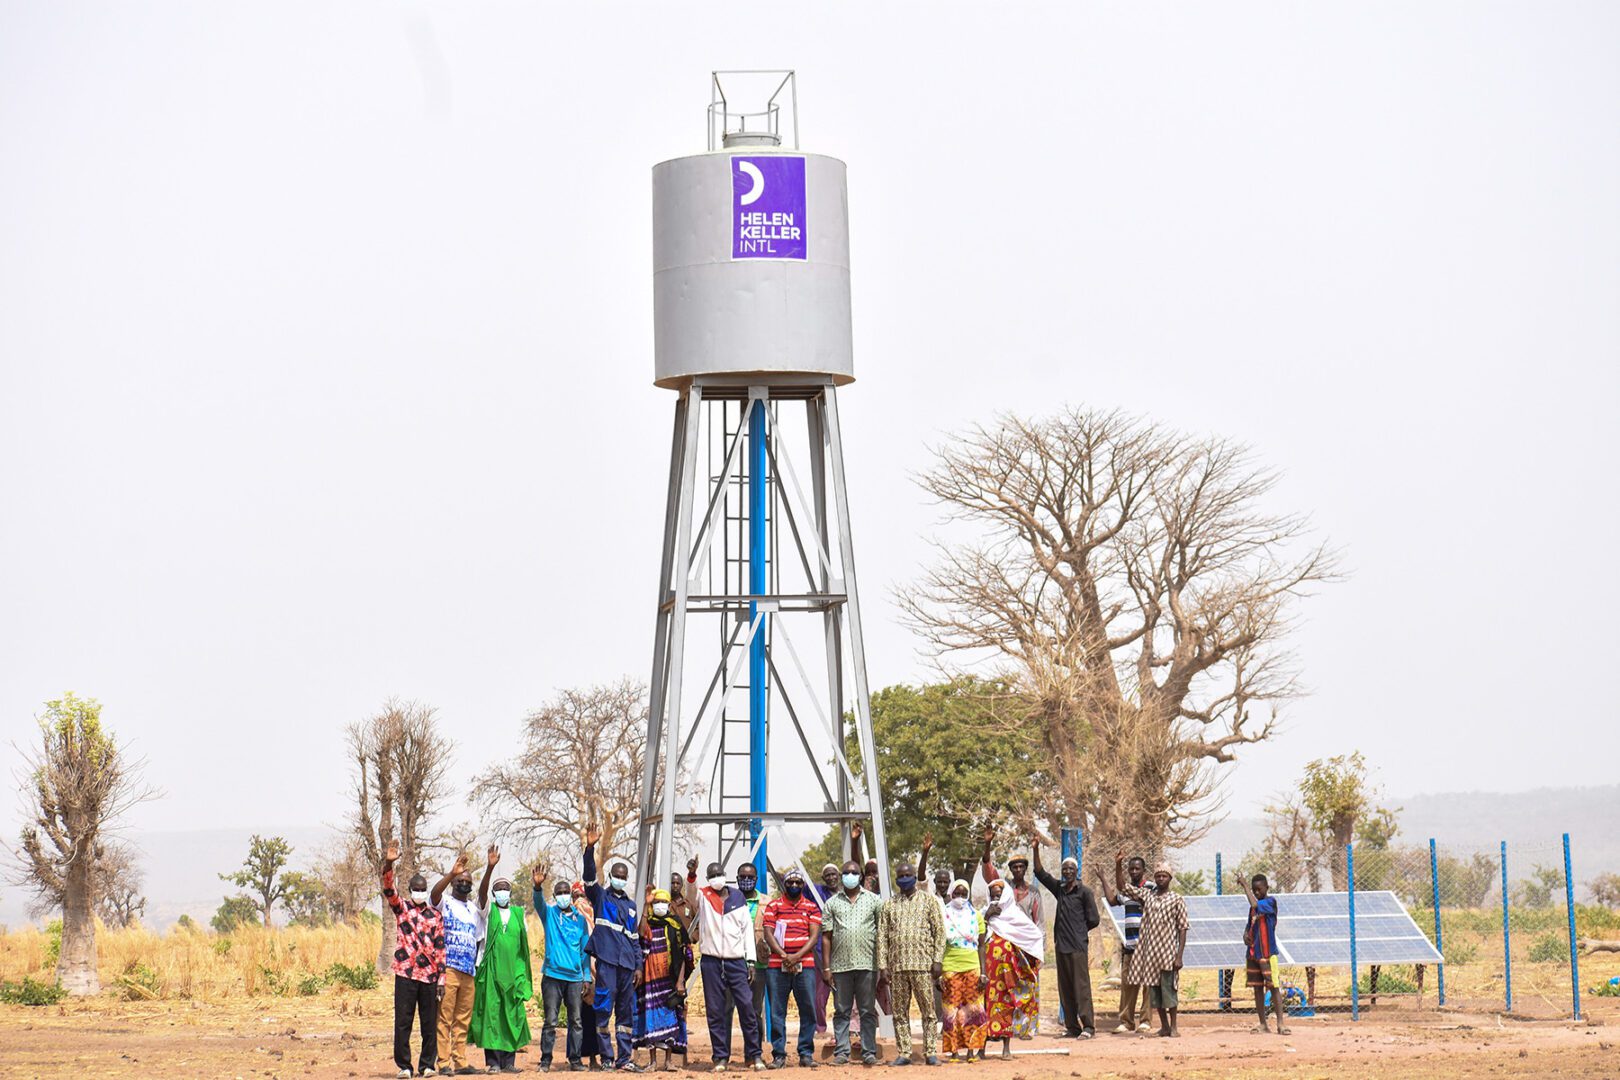 Gadiala Sissoko, Village chief opens the first water jet from Kambele borehole from Helen Keller on February 24, 2022.